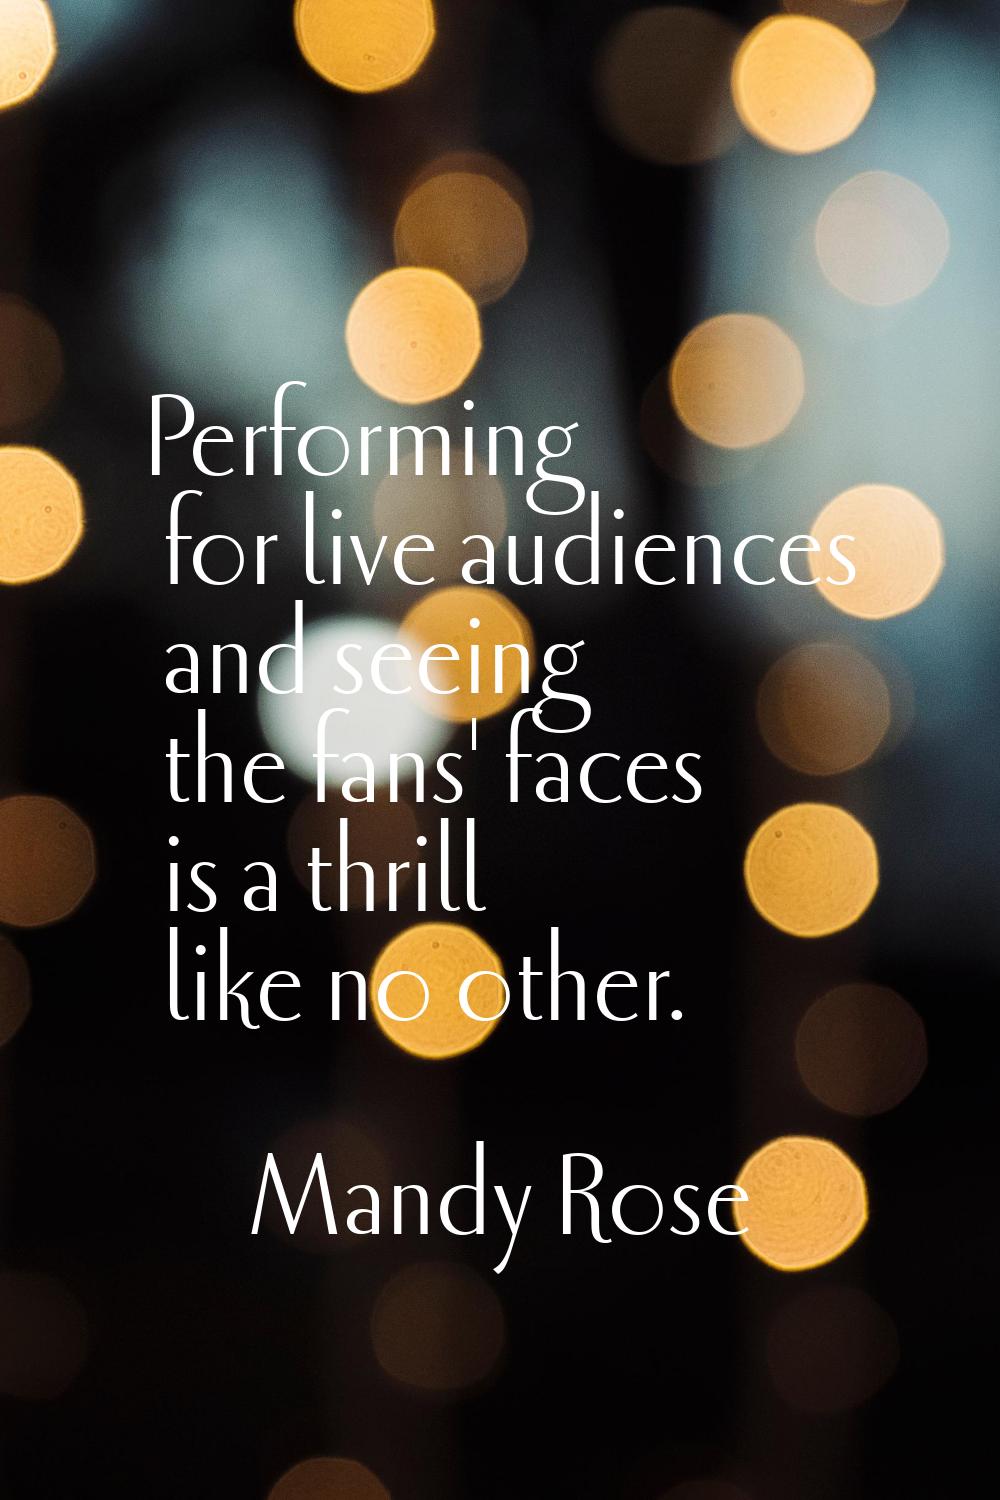 Performing for live audiences and seeing the fans' faces is a thrill like no other.